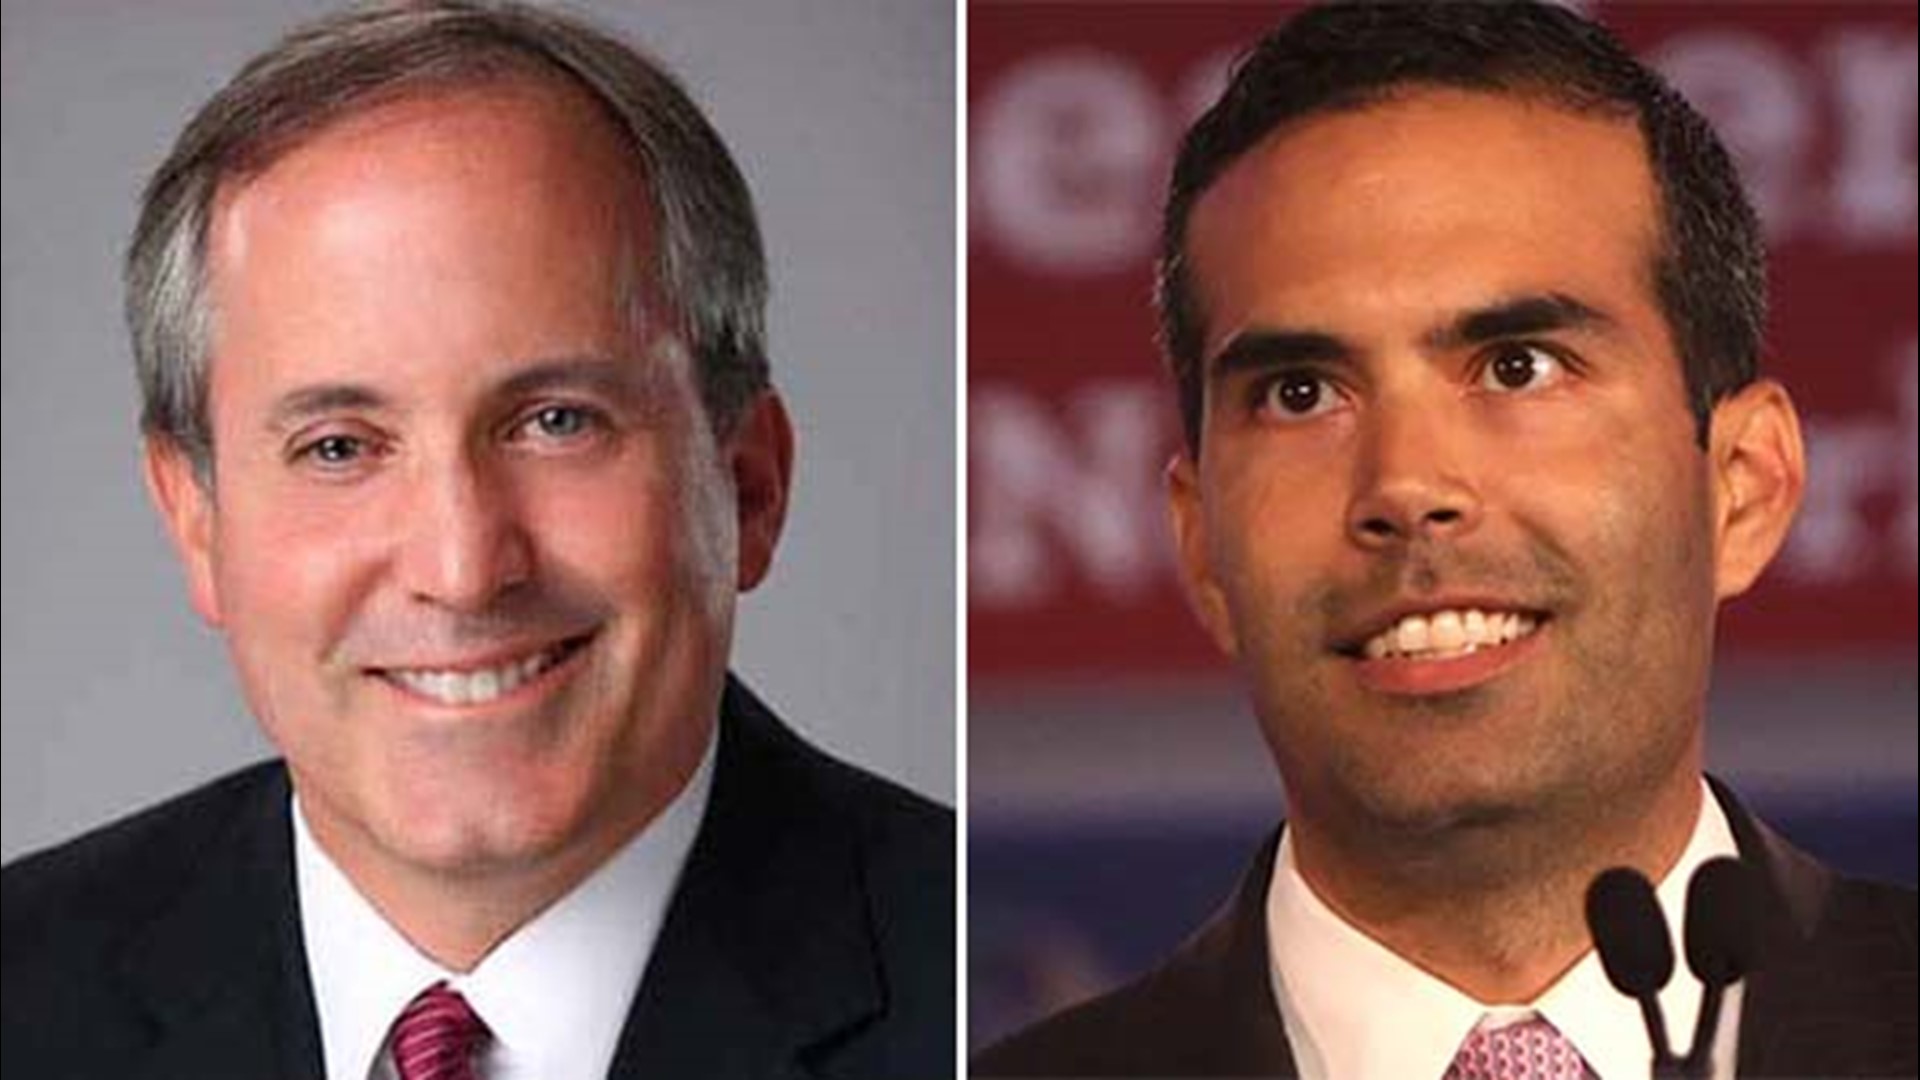 Incumbent Ken Paxton is being challenged by Land Commissioner George P. Bush in the Republican Run-Off Primary.